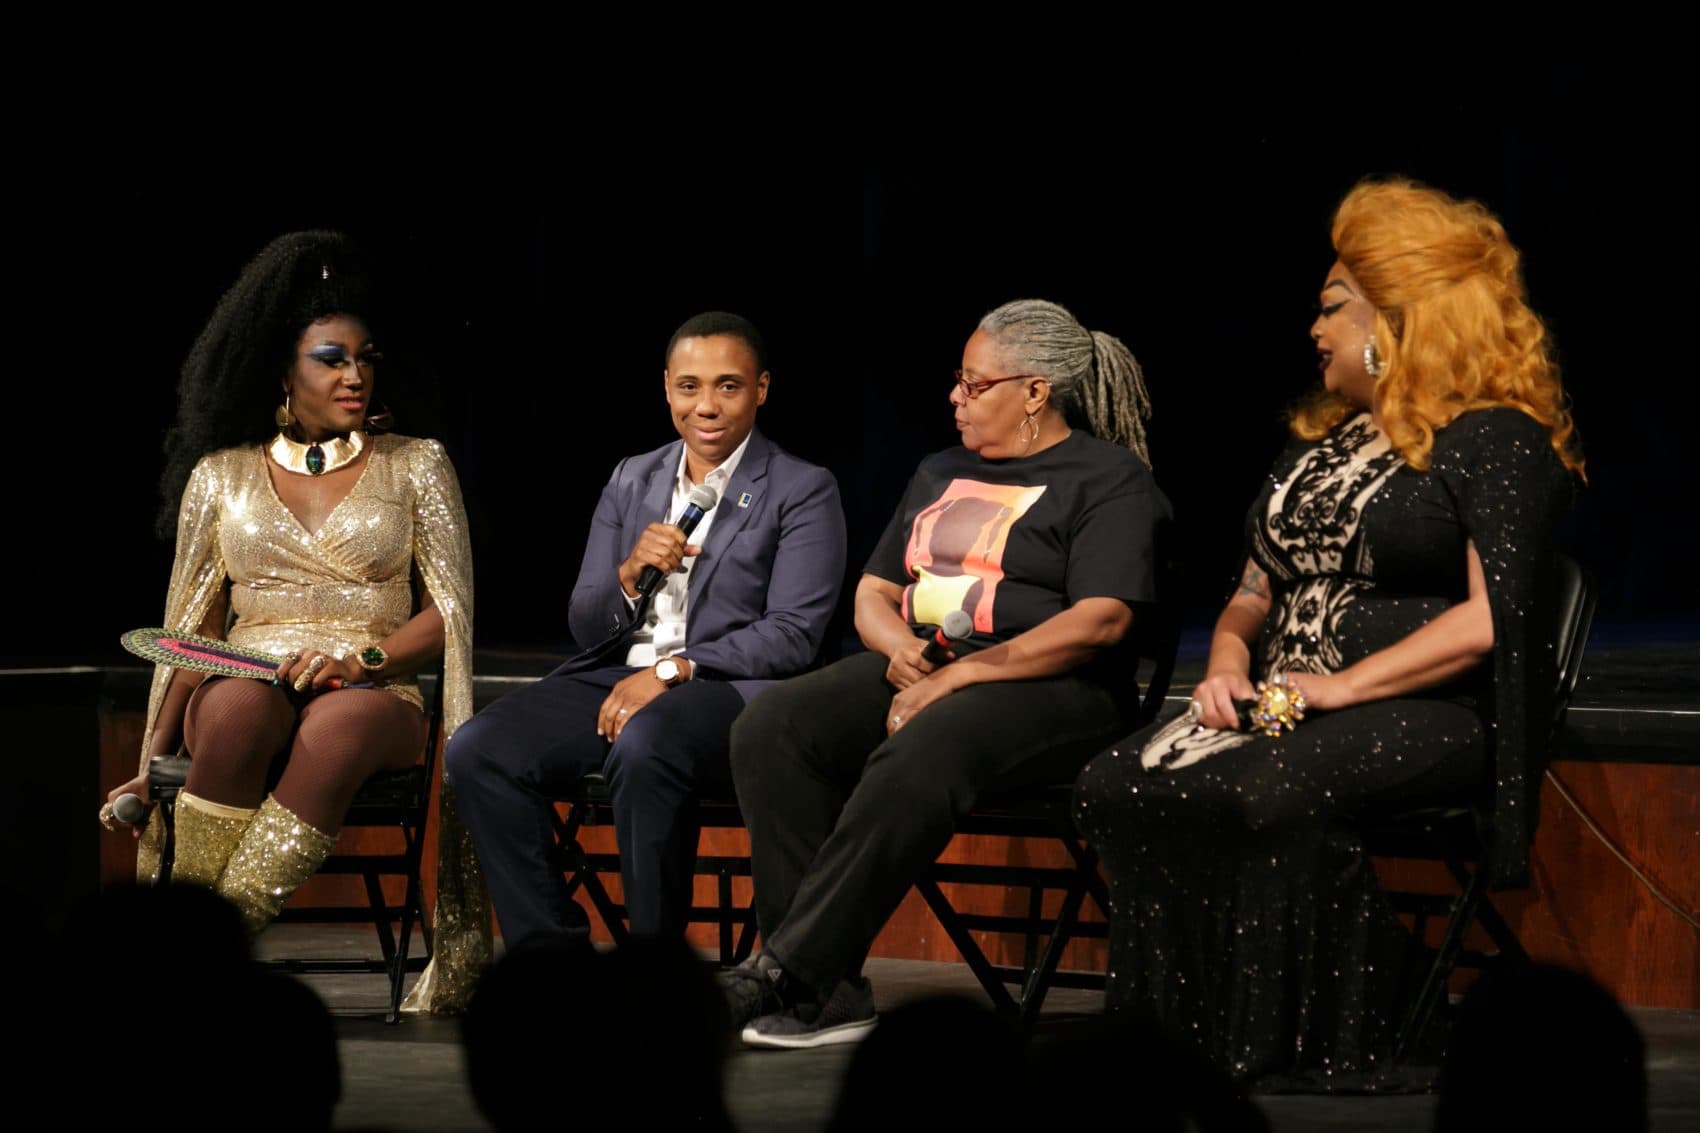 Central Park School for Children in Durham, N.C., invited Vivica Coxx (far right) and Stormie Daie (far left) — two social activists and drag queens of color — to lecture students about bullying. (Courtesy of Scoville Photography)